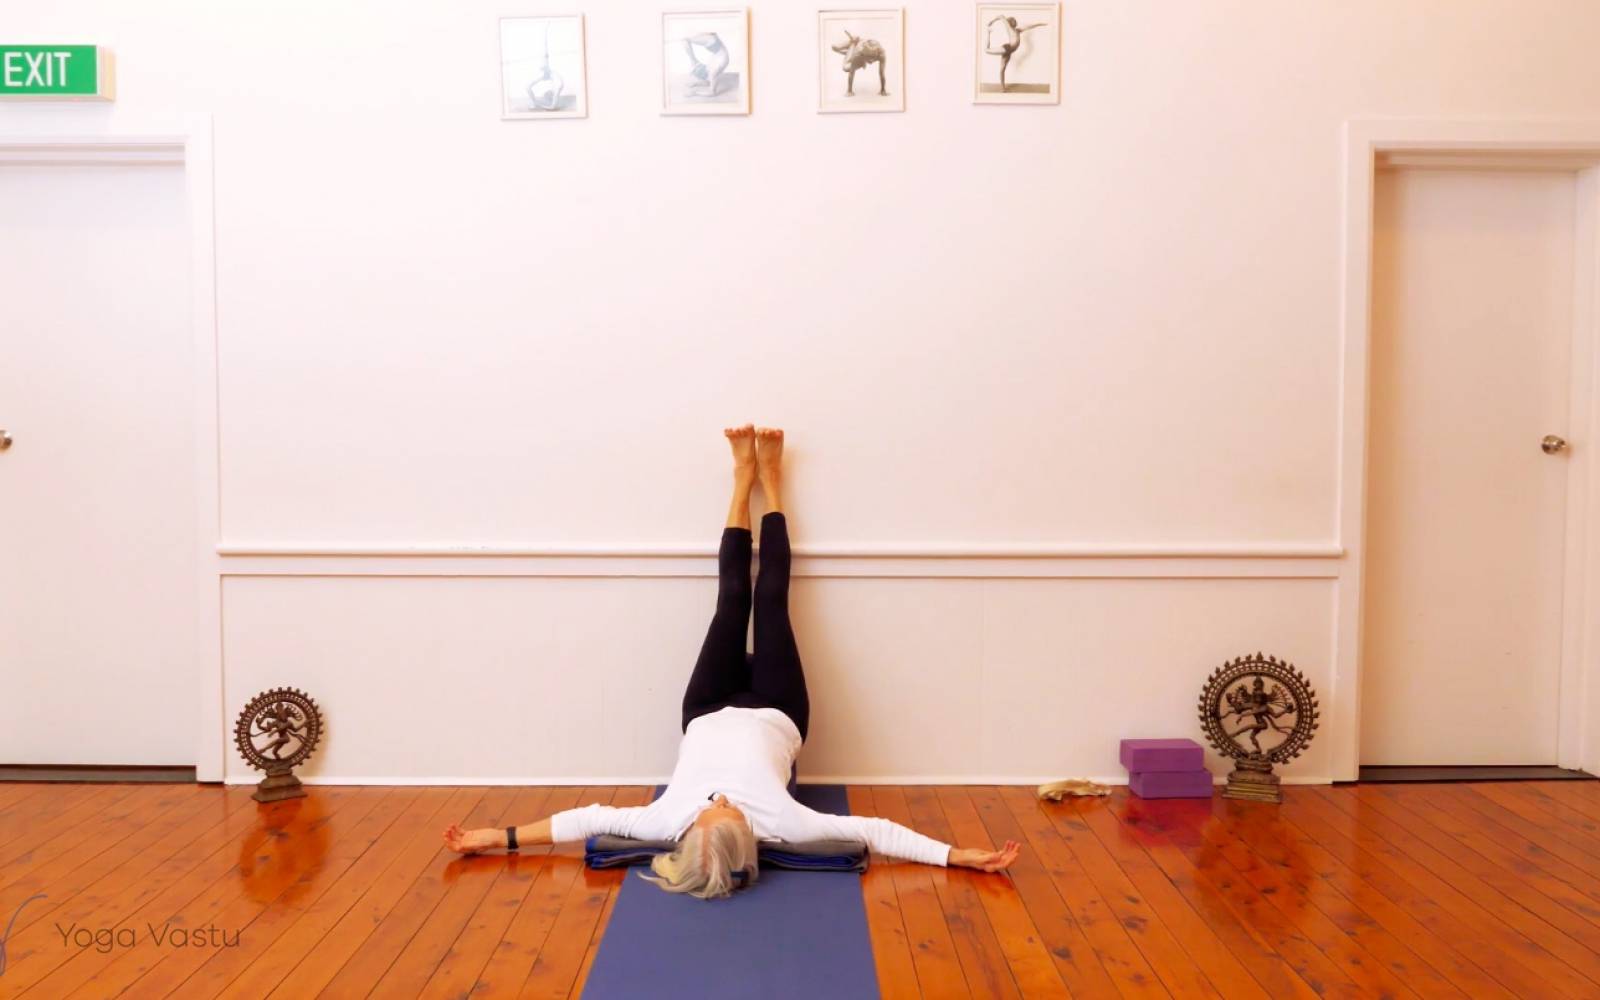 Twisting Yoga Poses: 10 Ways to Use the Wall When Twisting